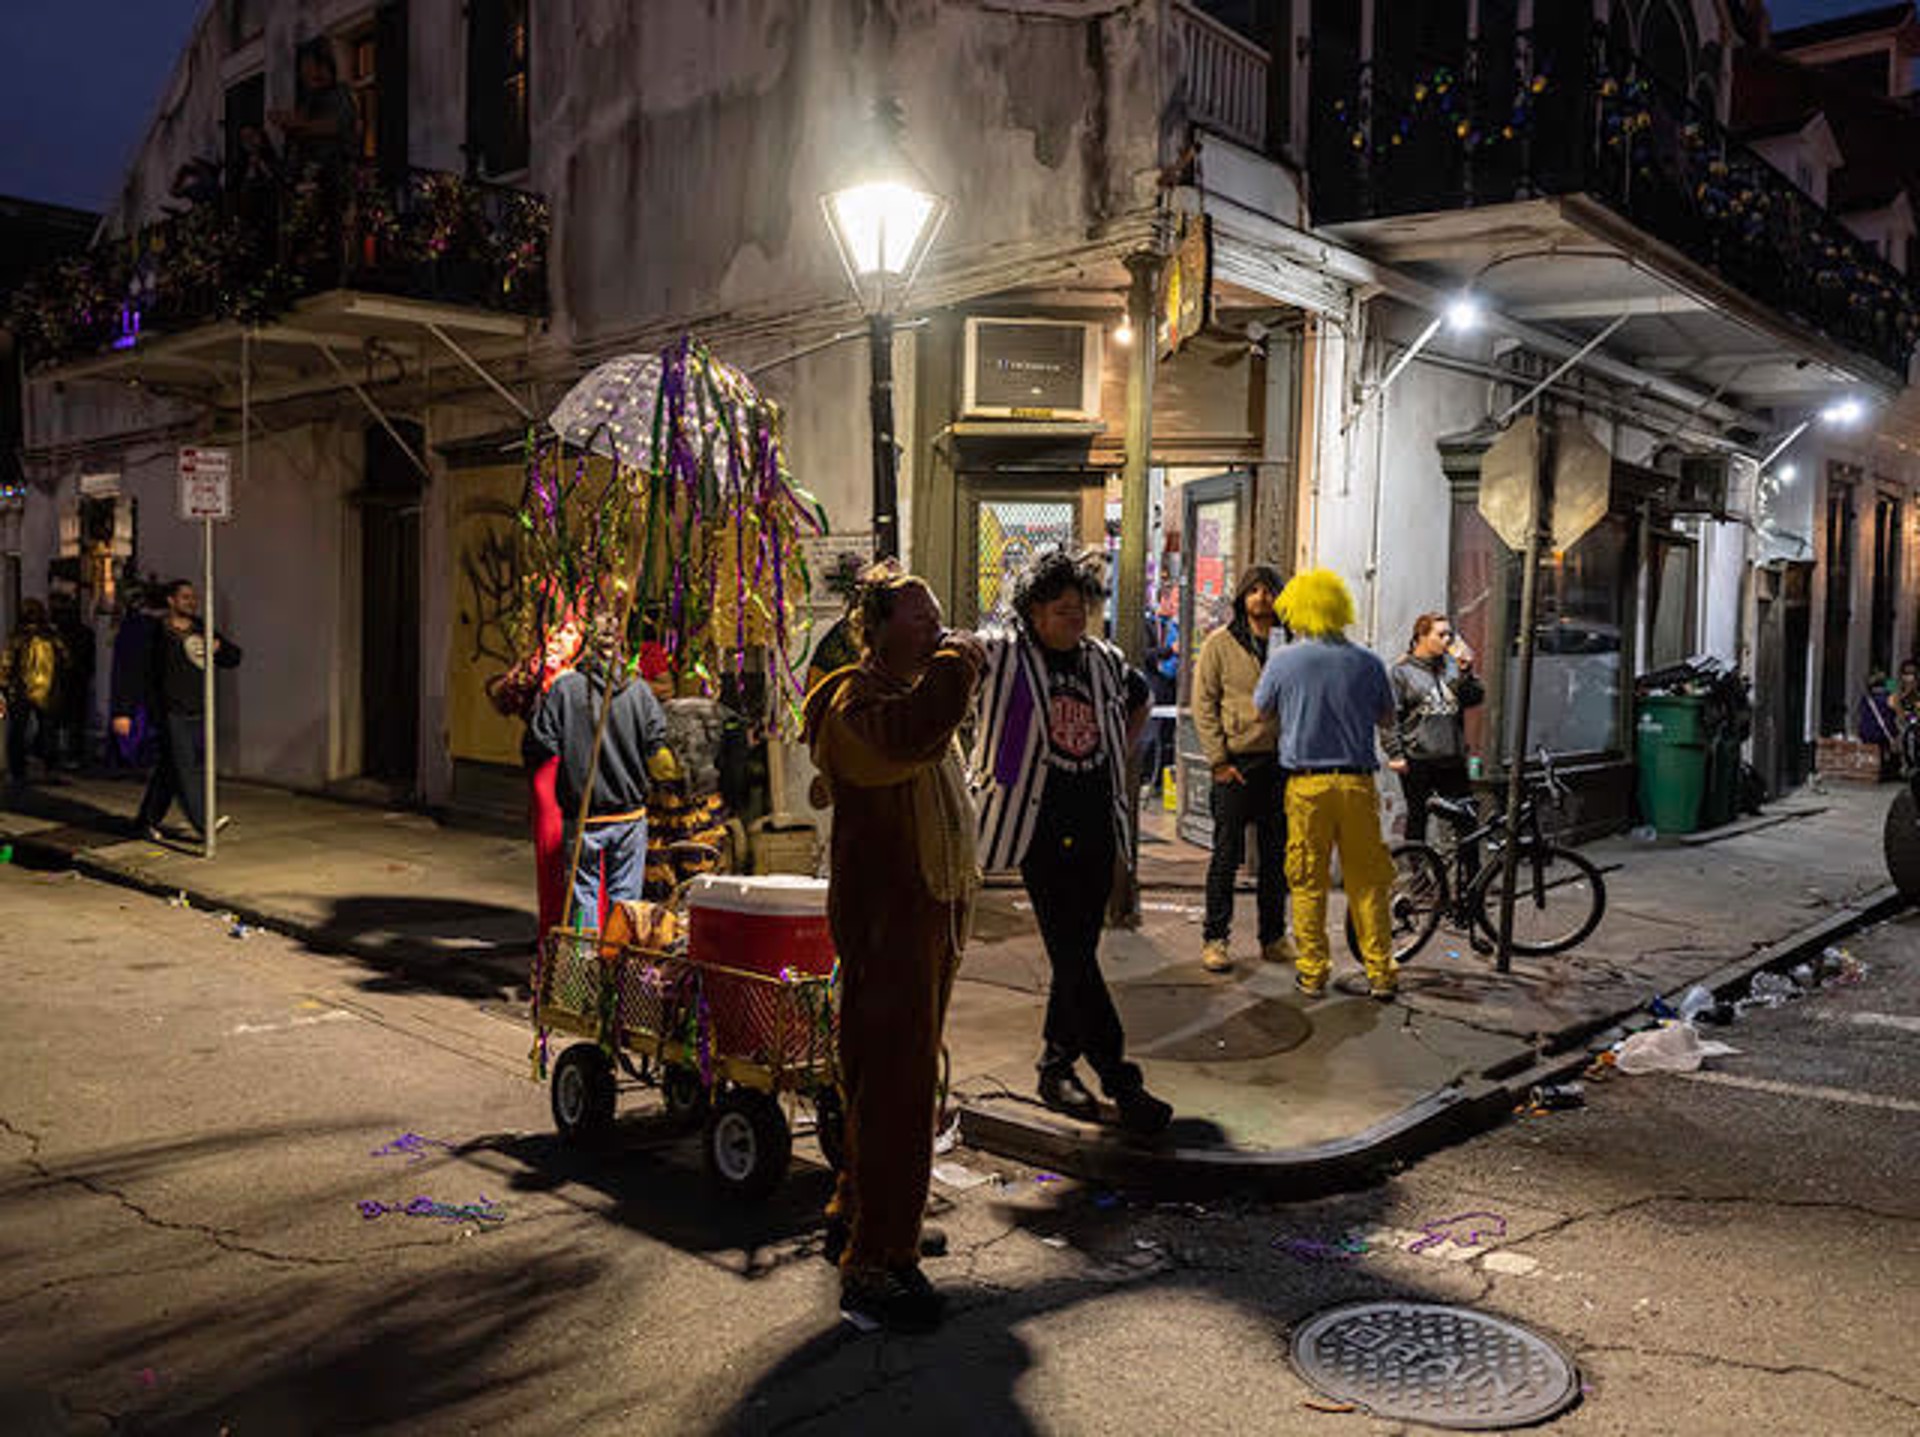 French Quarter Fat Tuesday by Stan Strembicki